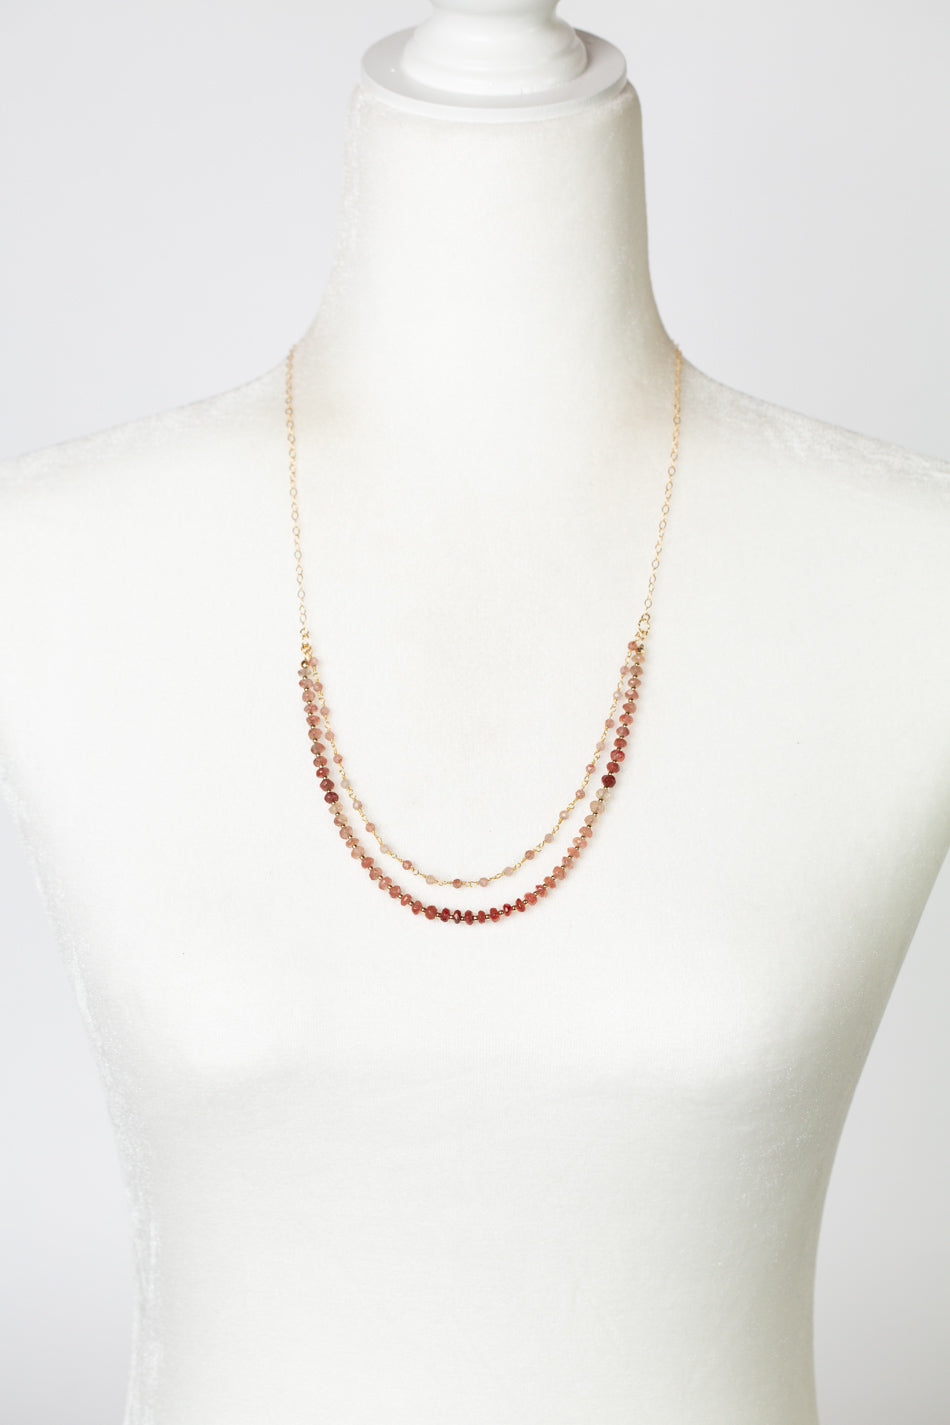 Divinity 23.5-25.5" Ombre Andesine, Faceted Fire Quartz Multistrand Necklace